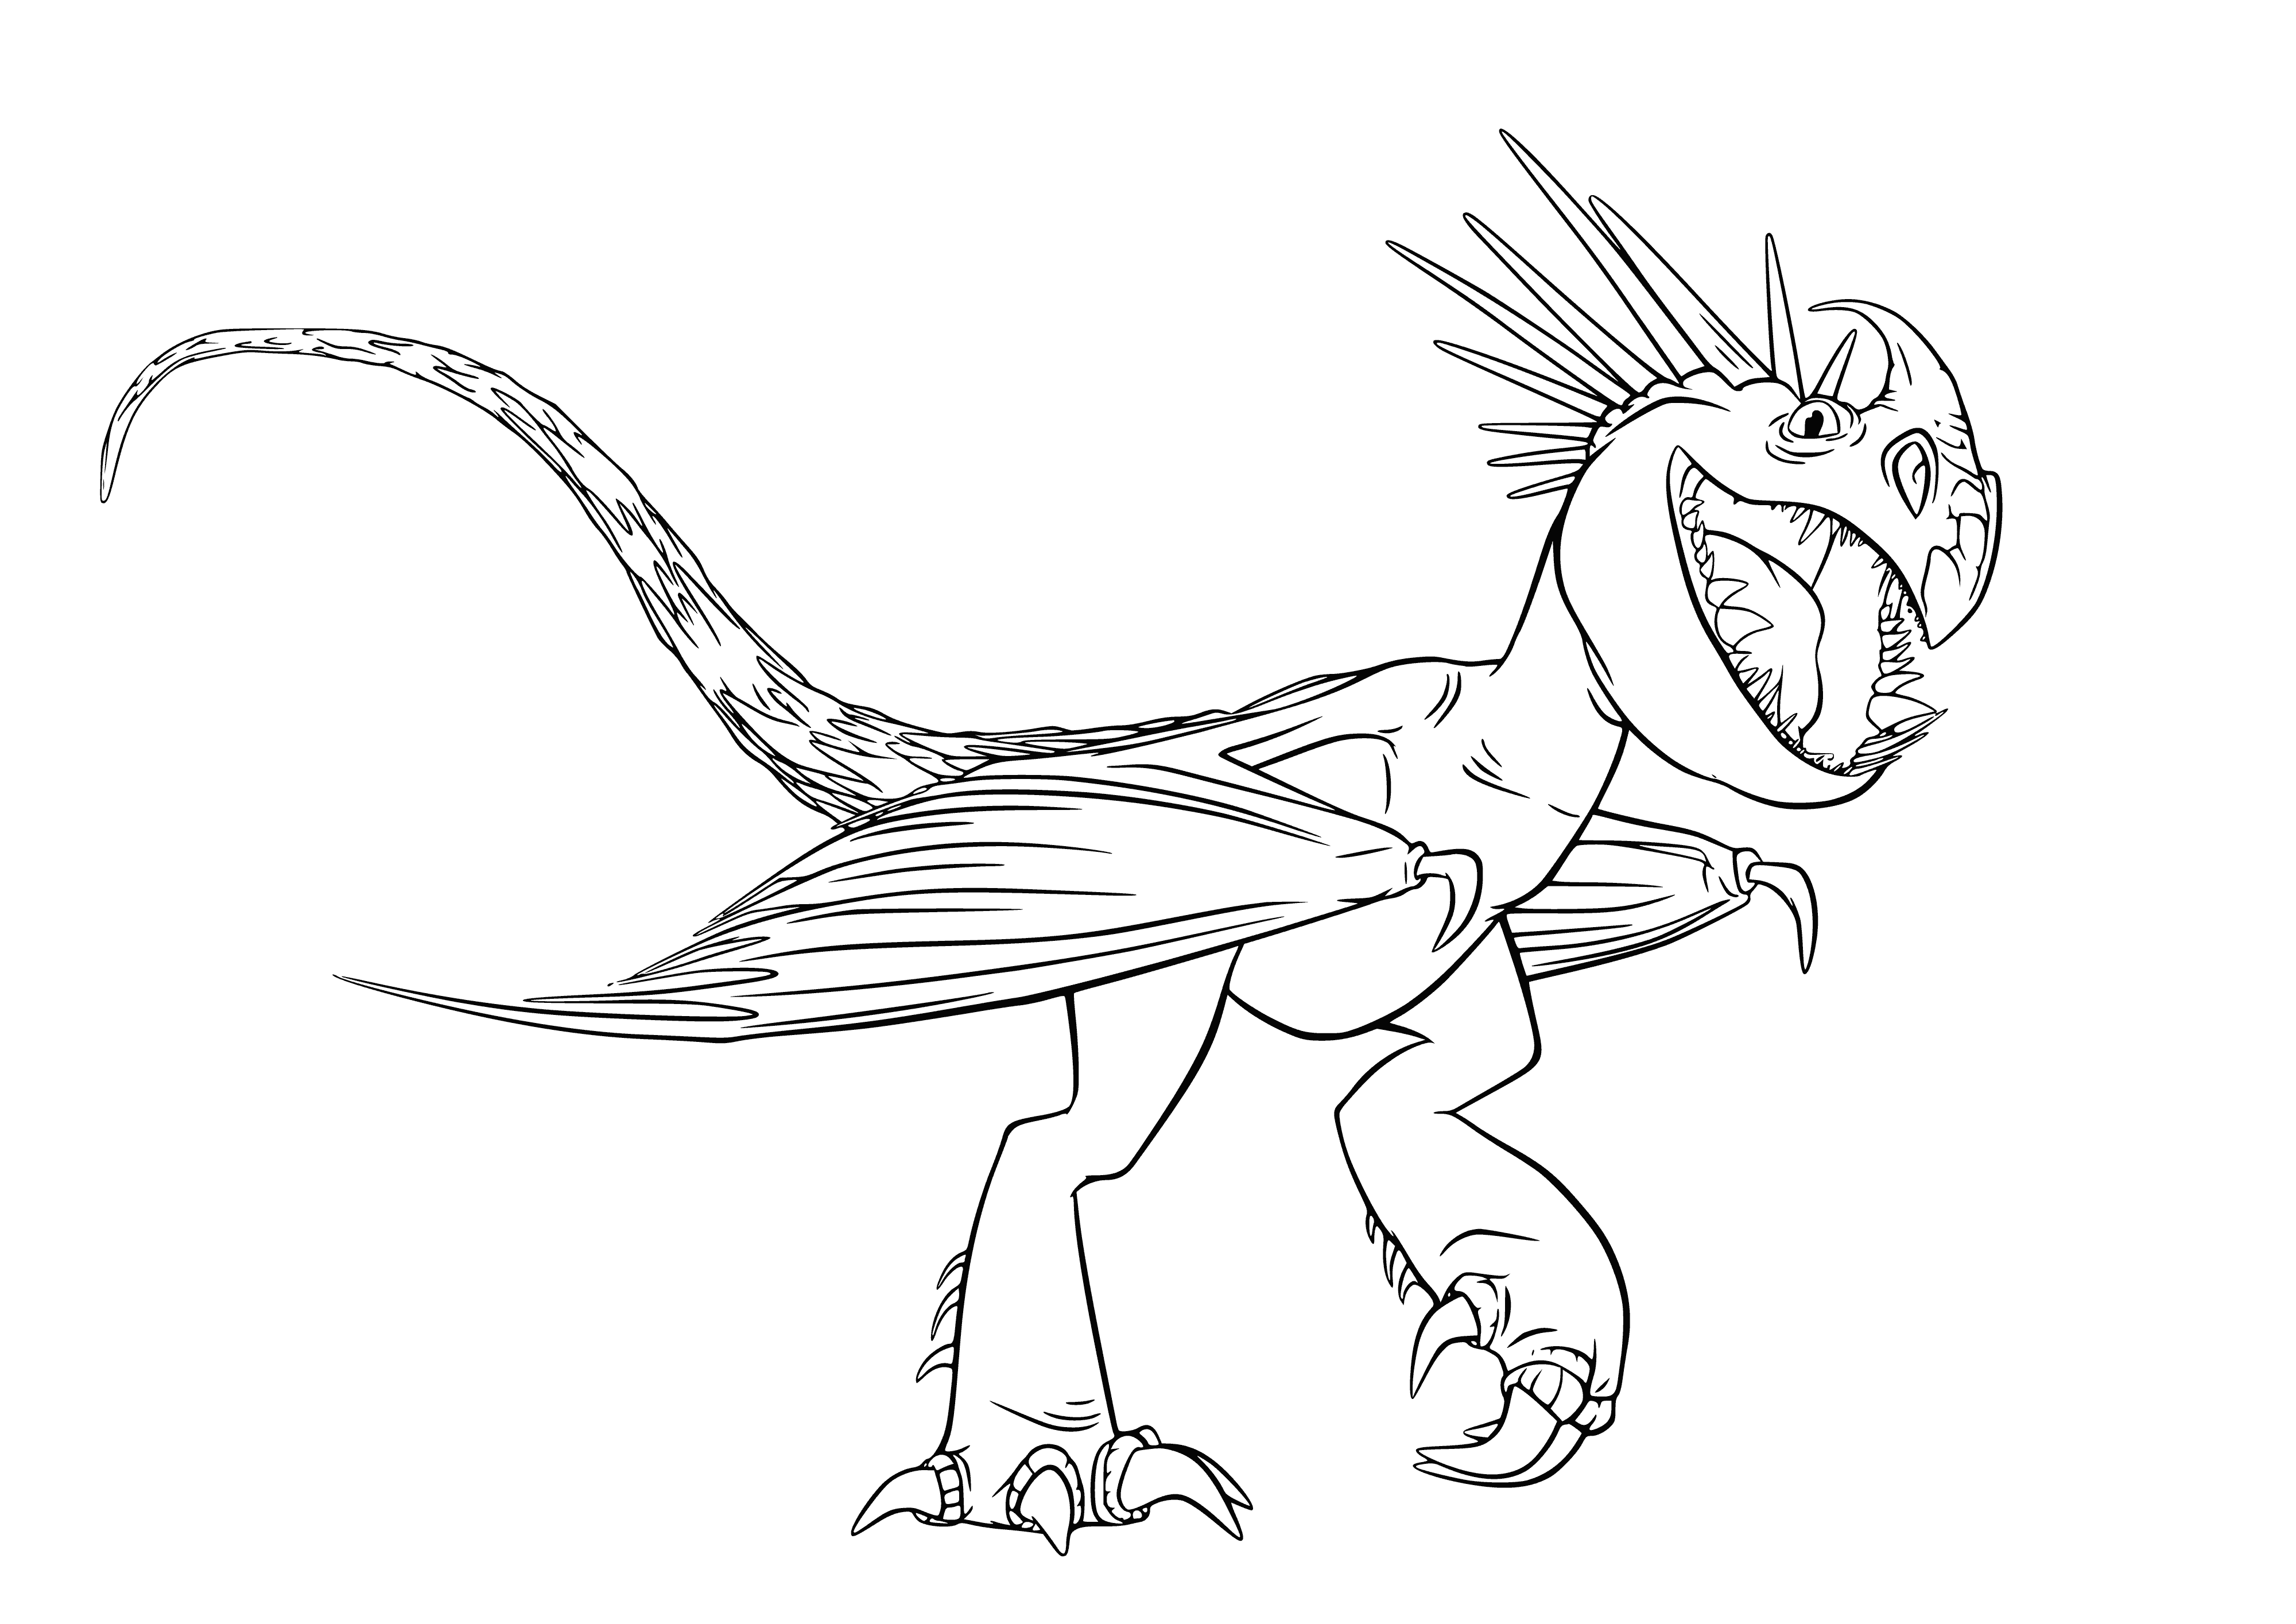 coloring page: A fierce purple dragon stands ready to fight, showcasing sharp claws and teeth. His wings are spread out in the center of the coloring page.